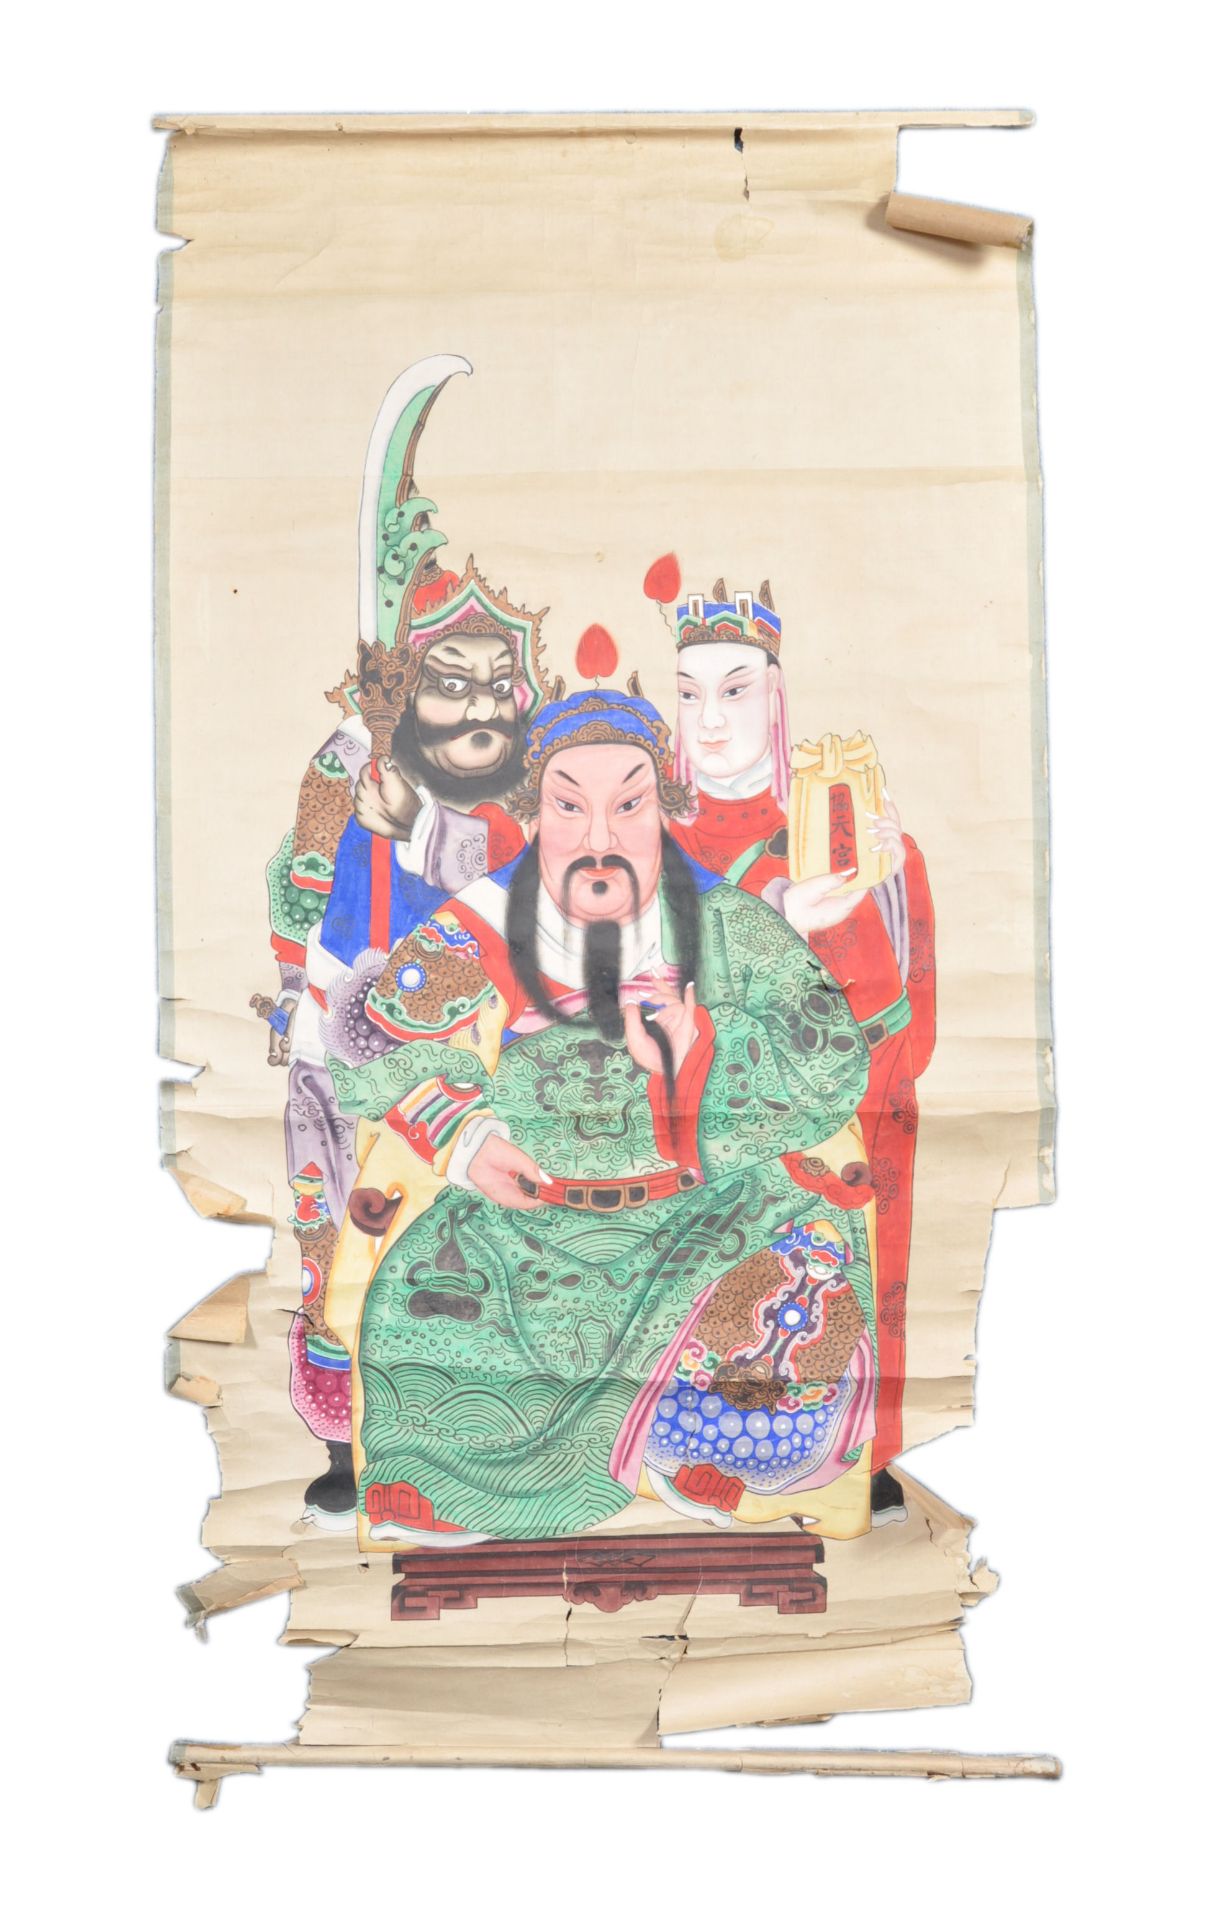 PAIR OF CHINESE HAND PAINTED EMPEROR PAPER SCROLLS - Image 6 of 8